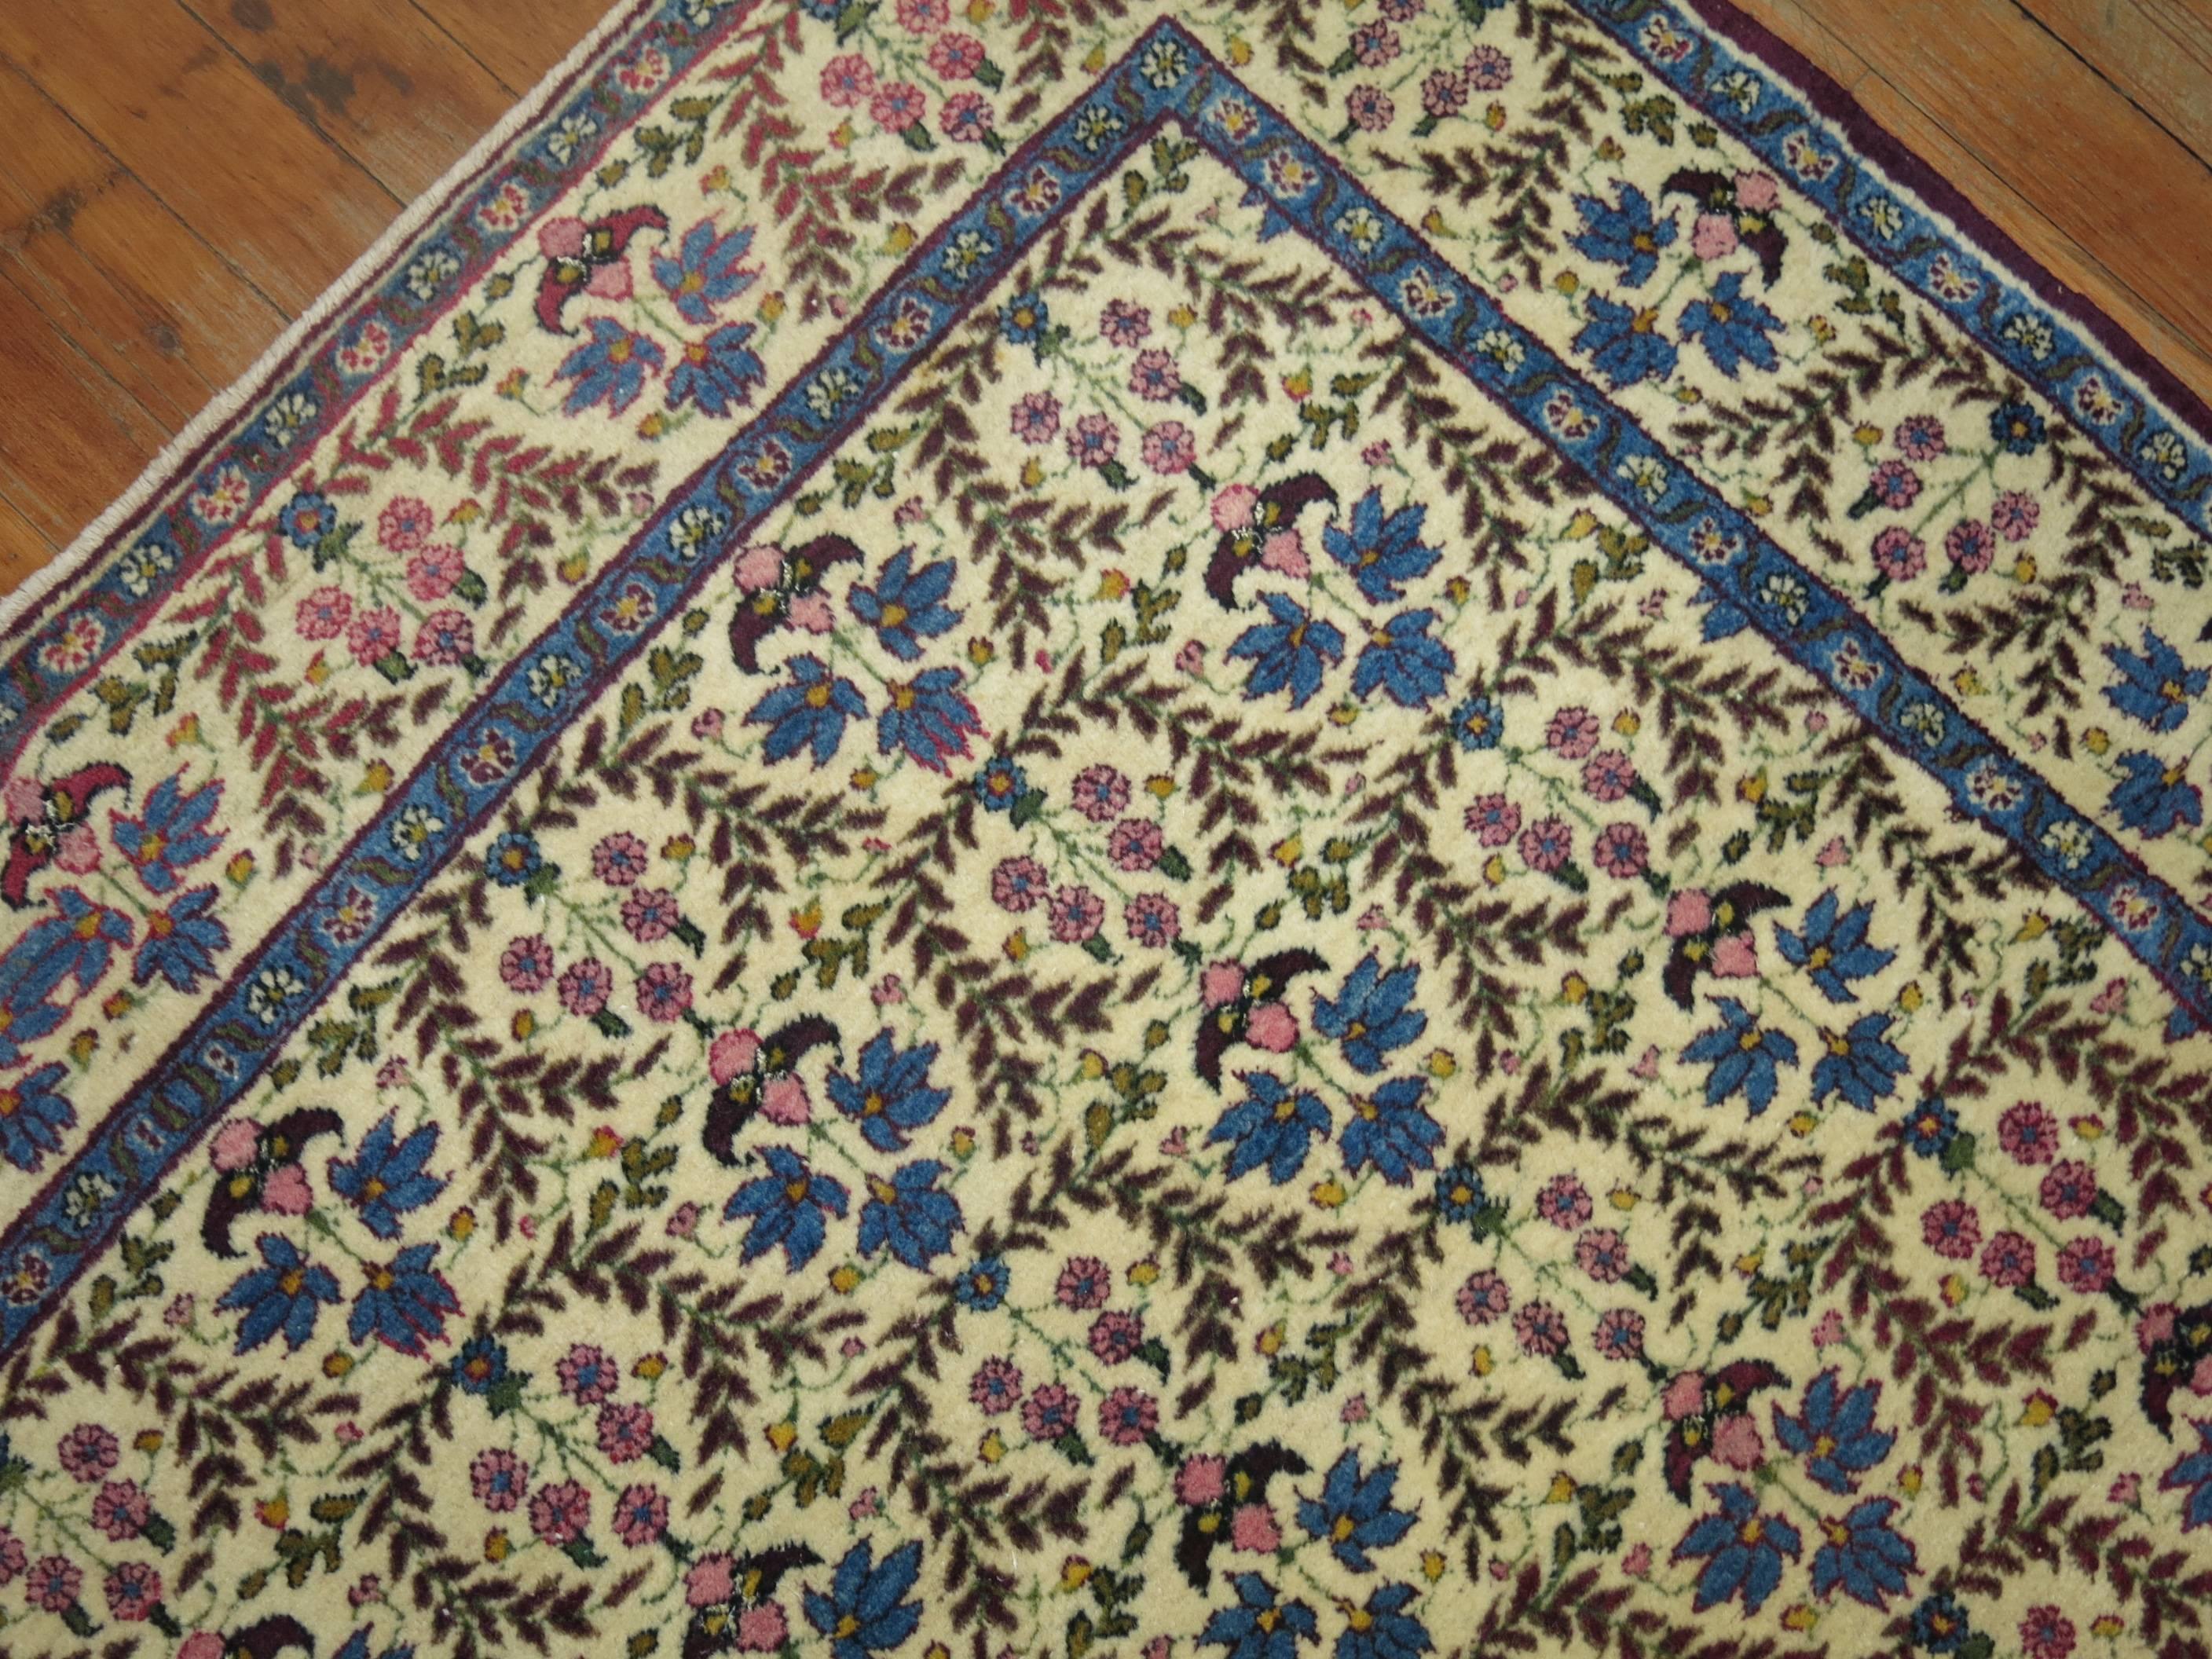 A 20th century Persian Kerman with a matching repetitive floral design in field and border.